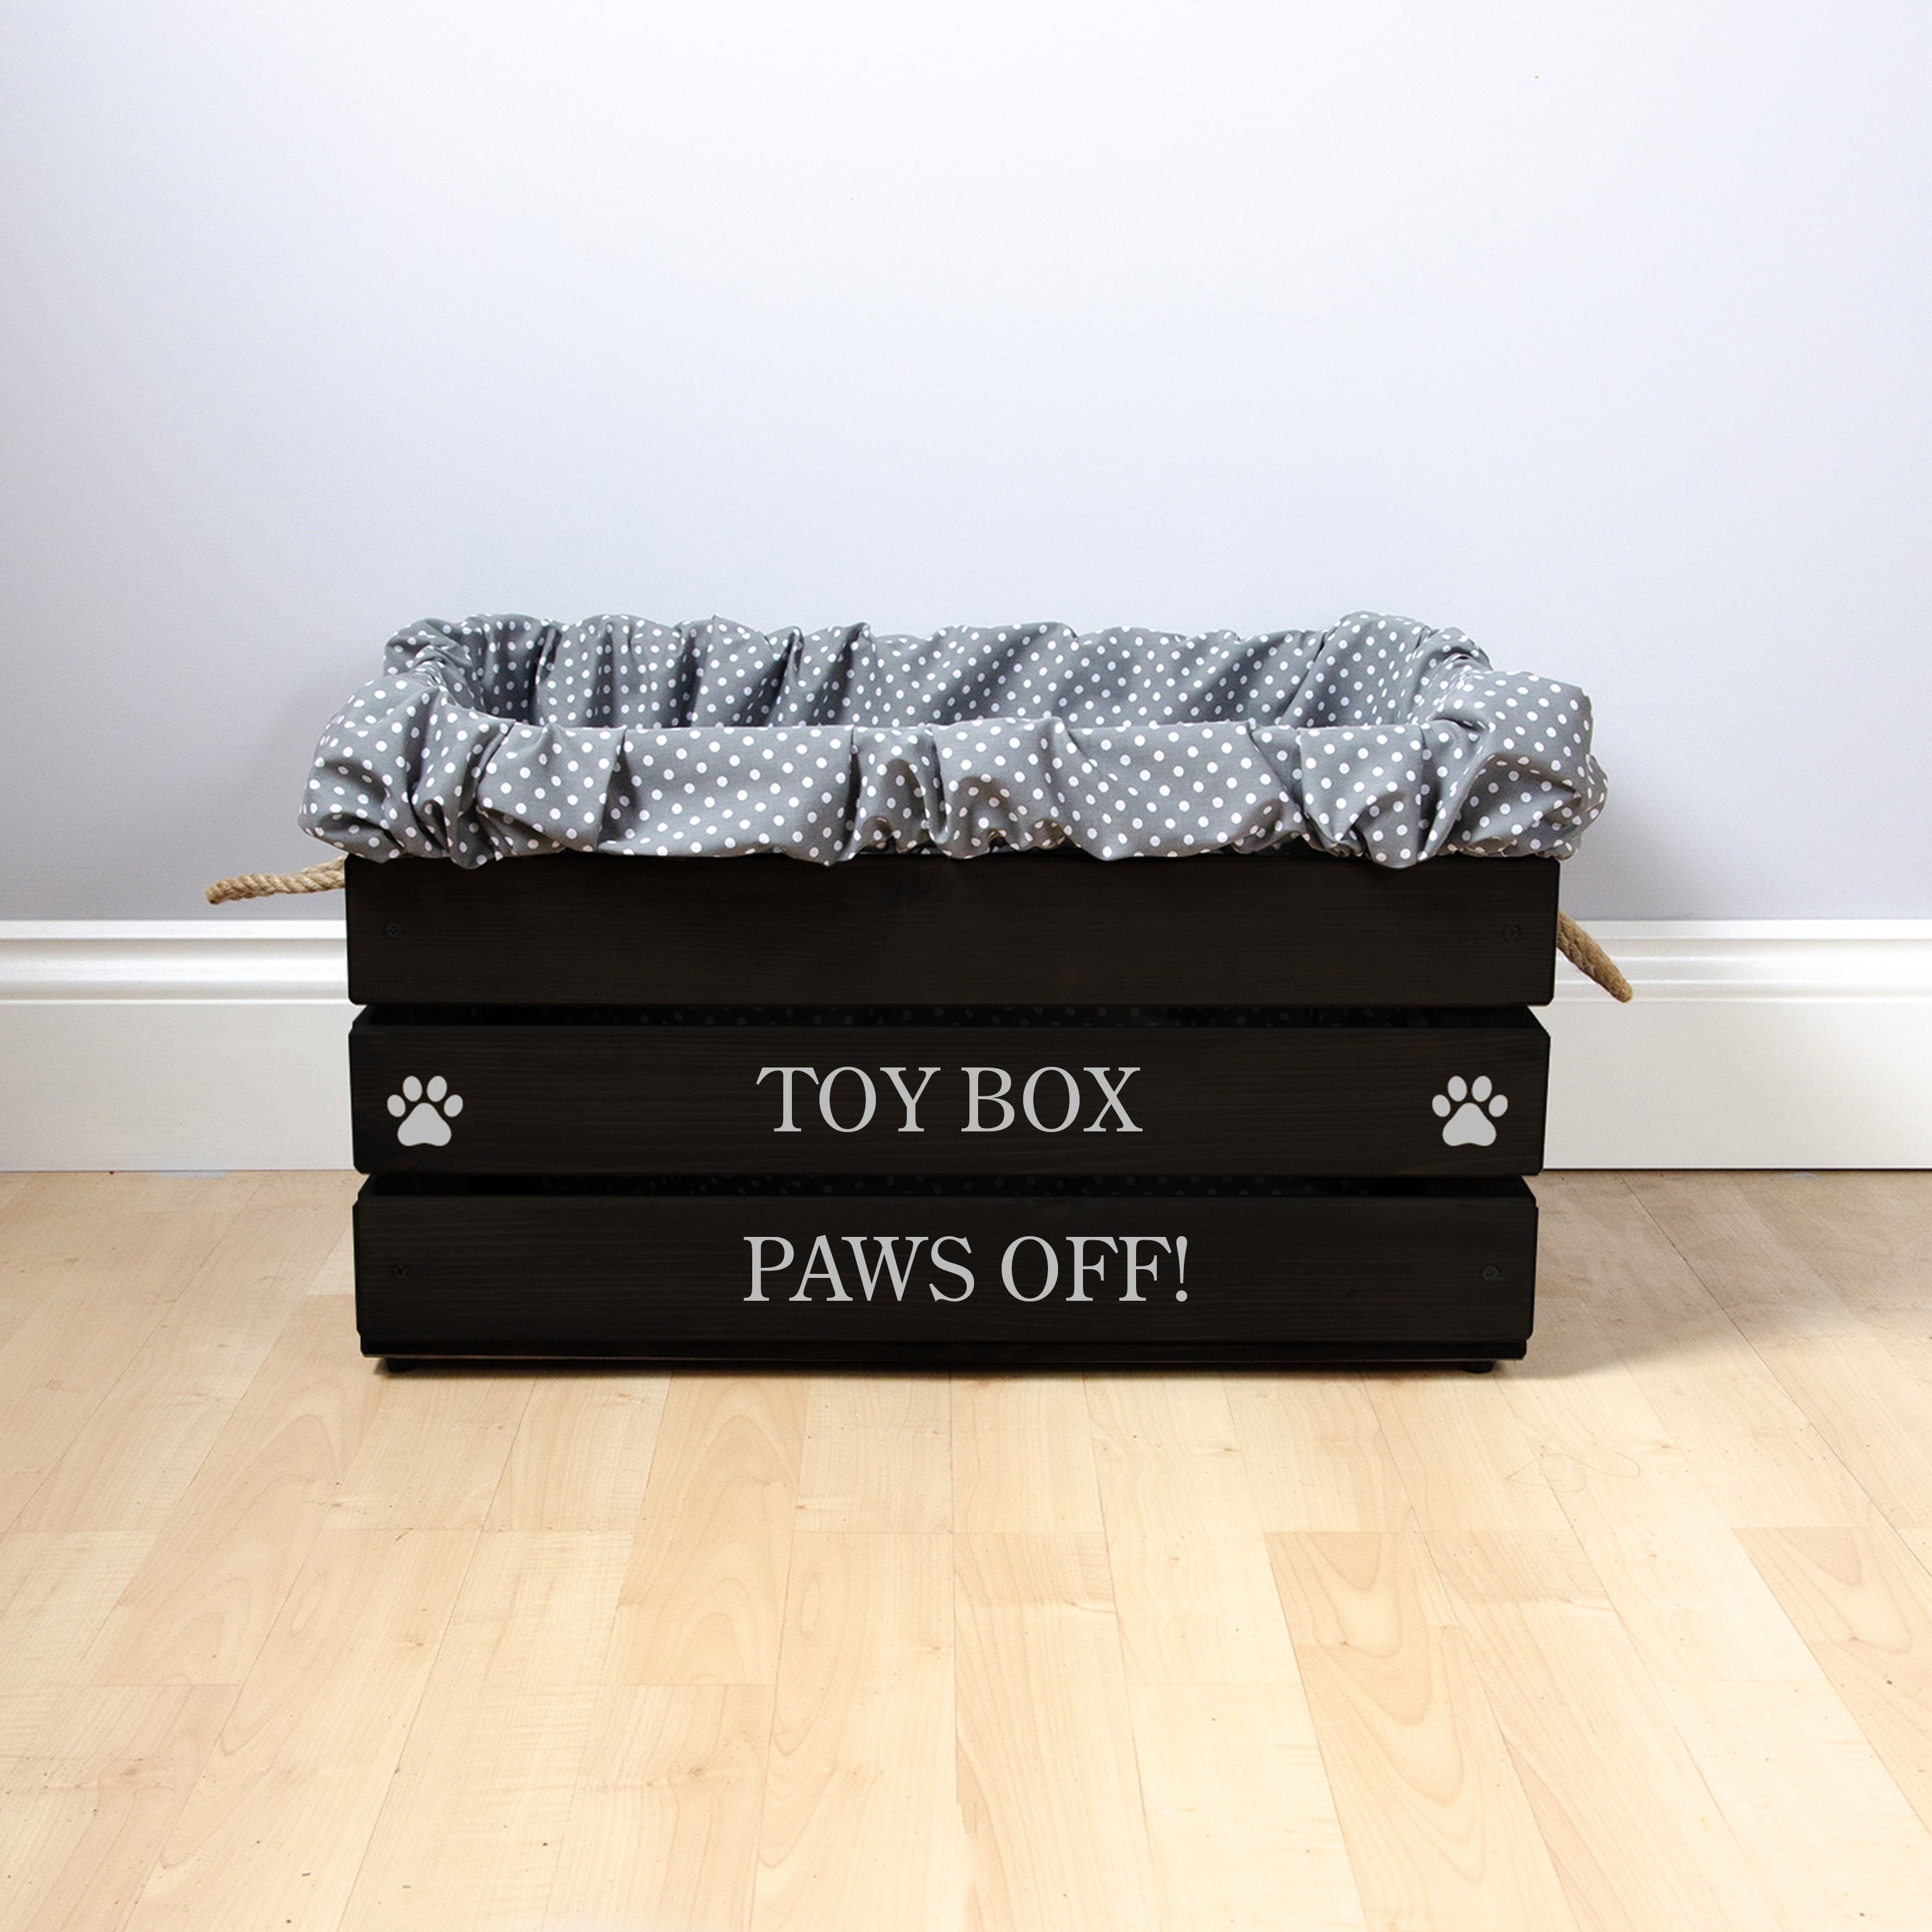 Medium Personalised Dog Toy Box with Removable Linen- Black, Dog Toys, Personalised Dog Toys, Dog Toy Box, Large pet toy box, Black Toy Box